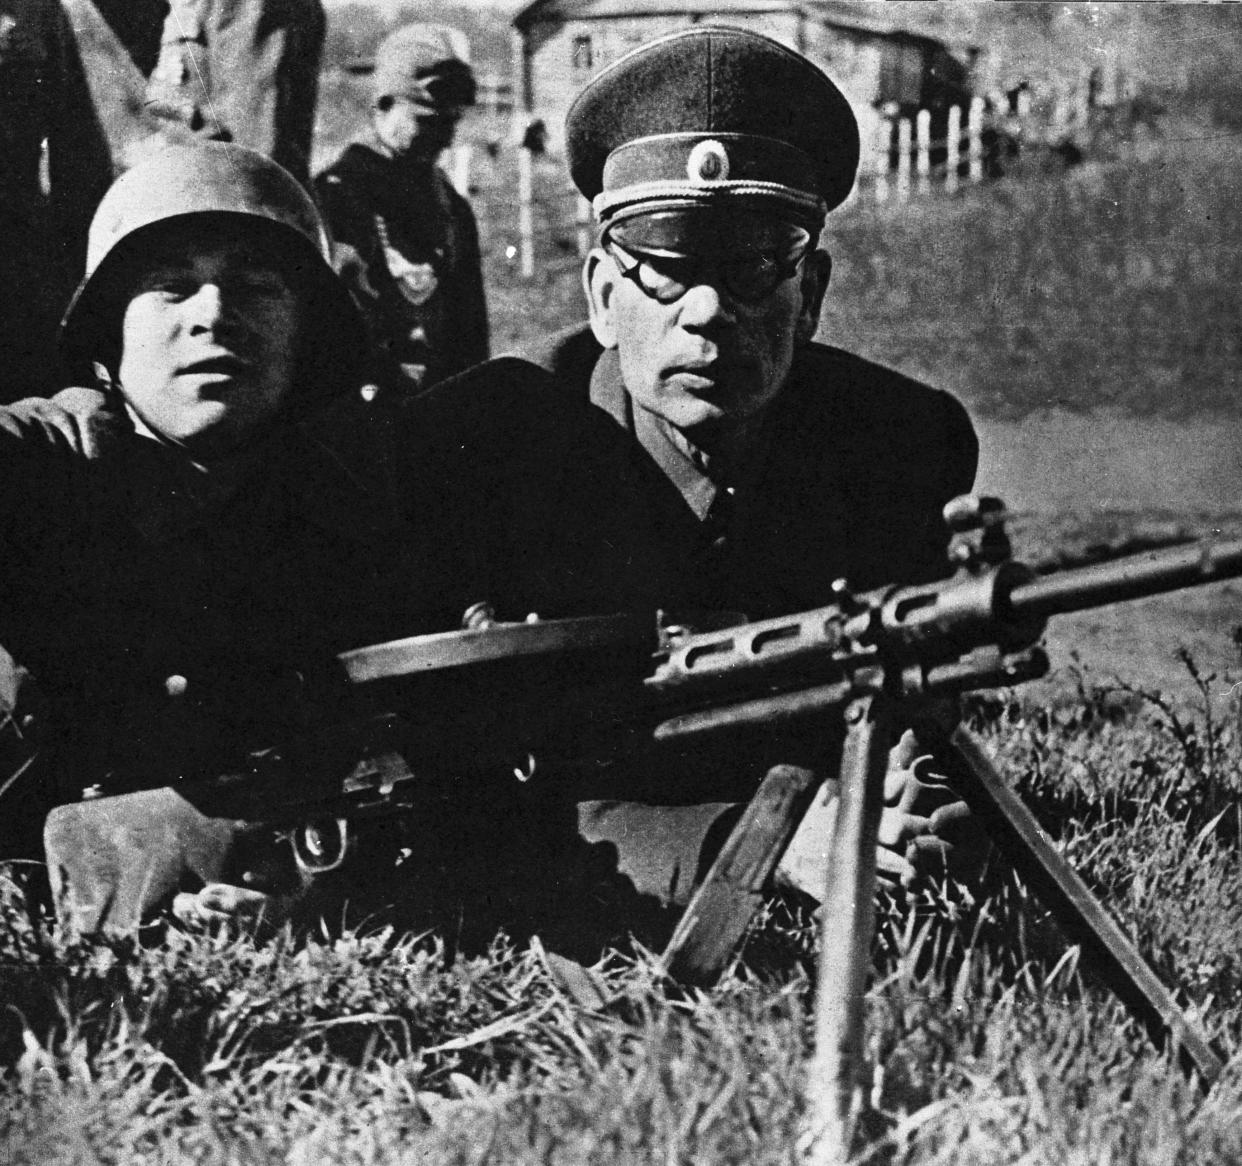 UNSPECIFIED - CIRCA 1943:  World War II. Soviet General Andrey Vlasov during manoeuvres of Russian volunteers' training, 1943.  (Roger Viollet via Getty Images)